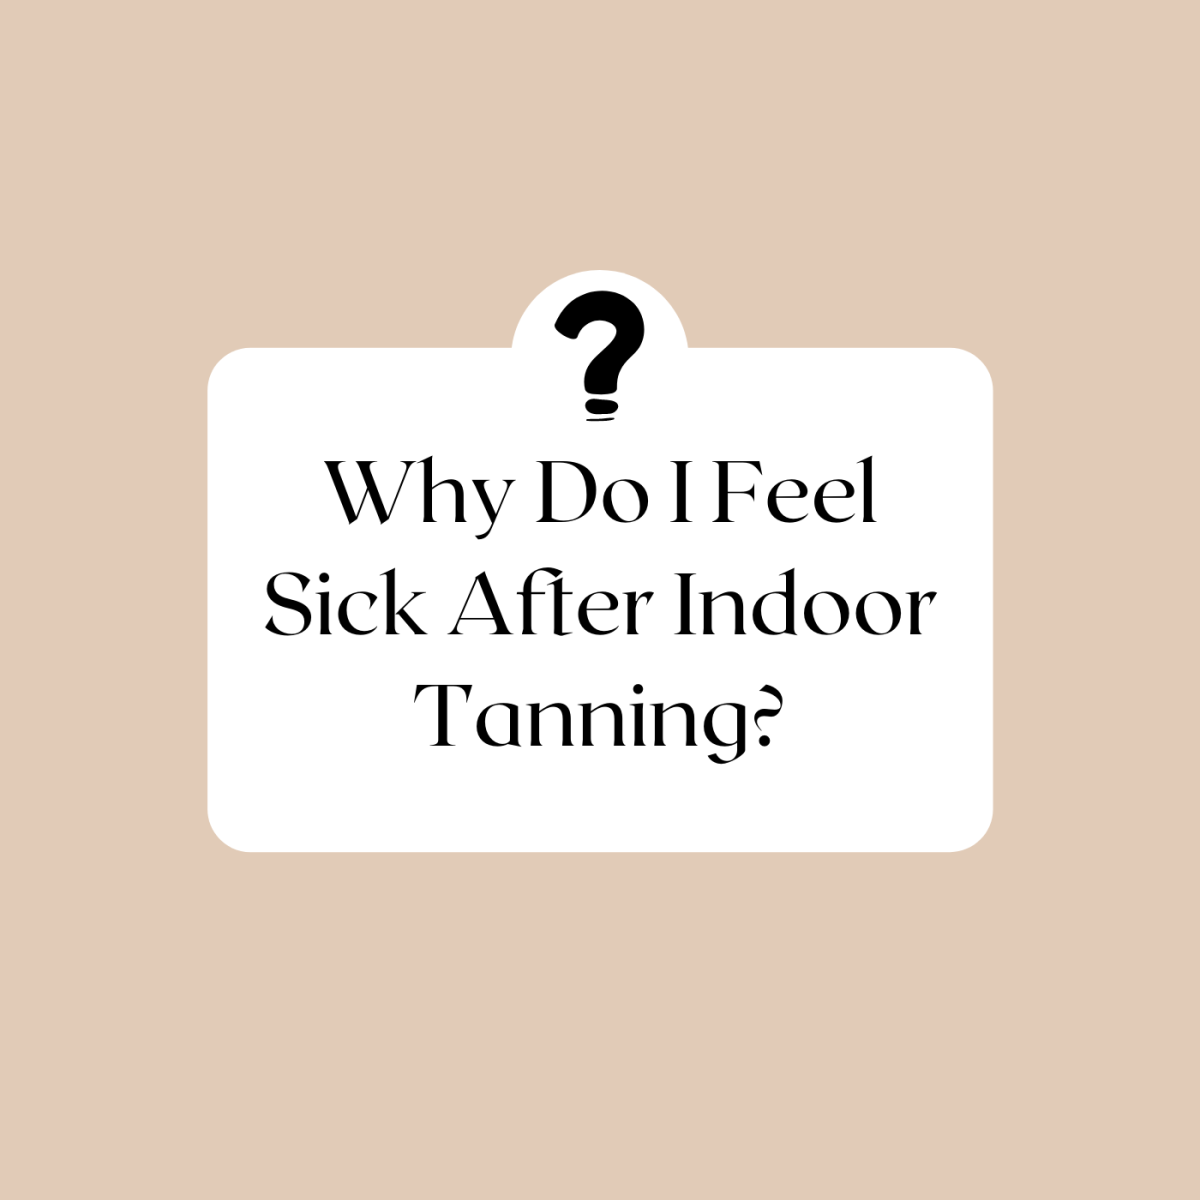 Why Do I Feel Sick After Indoor Tanning?